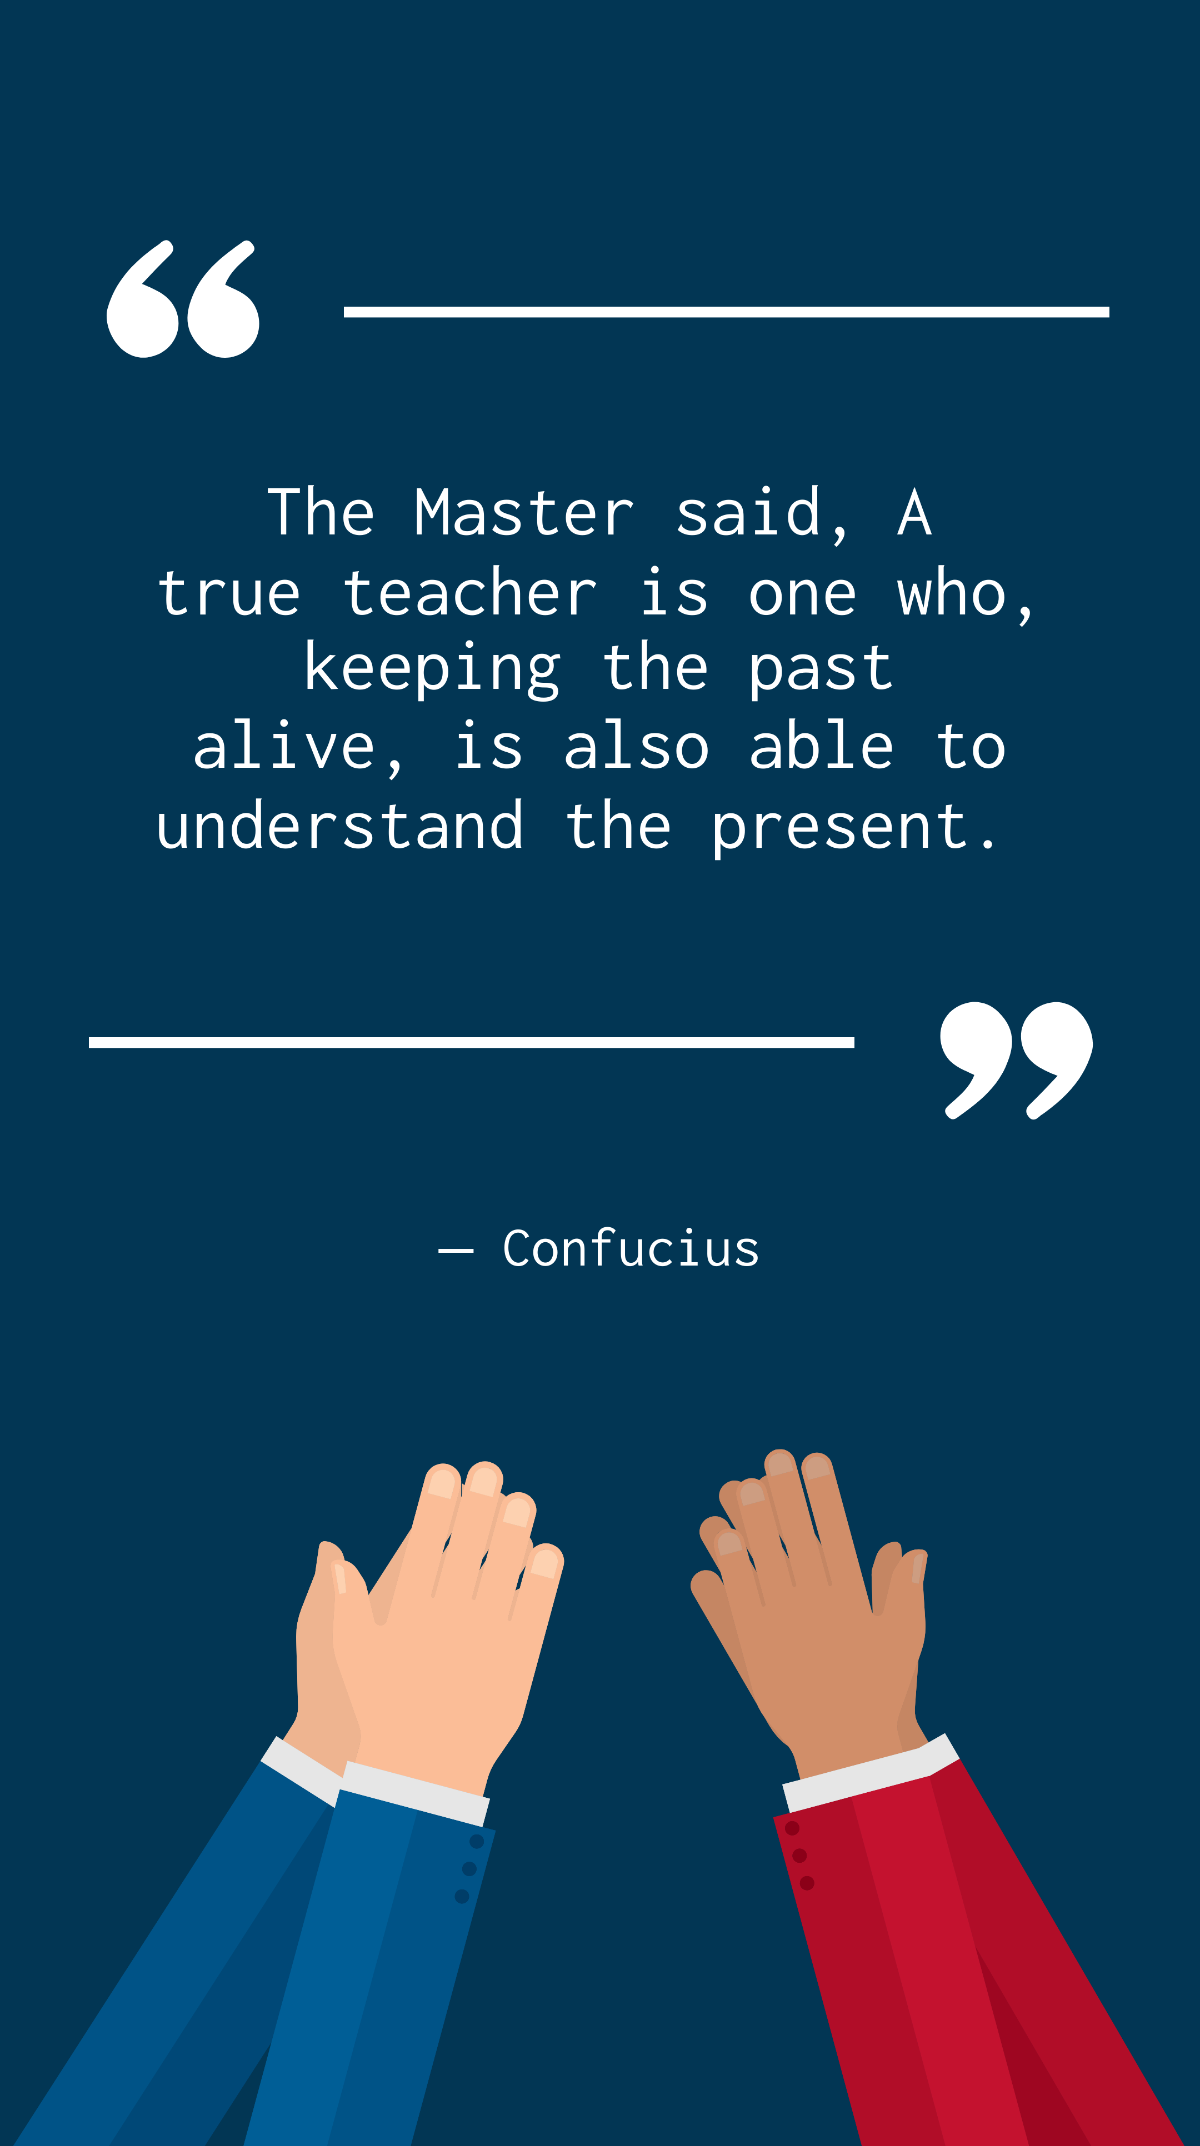 Confucius - The Master said, A true teacher is one who, keeping the past alive, is also able to understand the present. Template